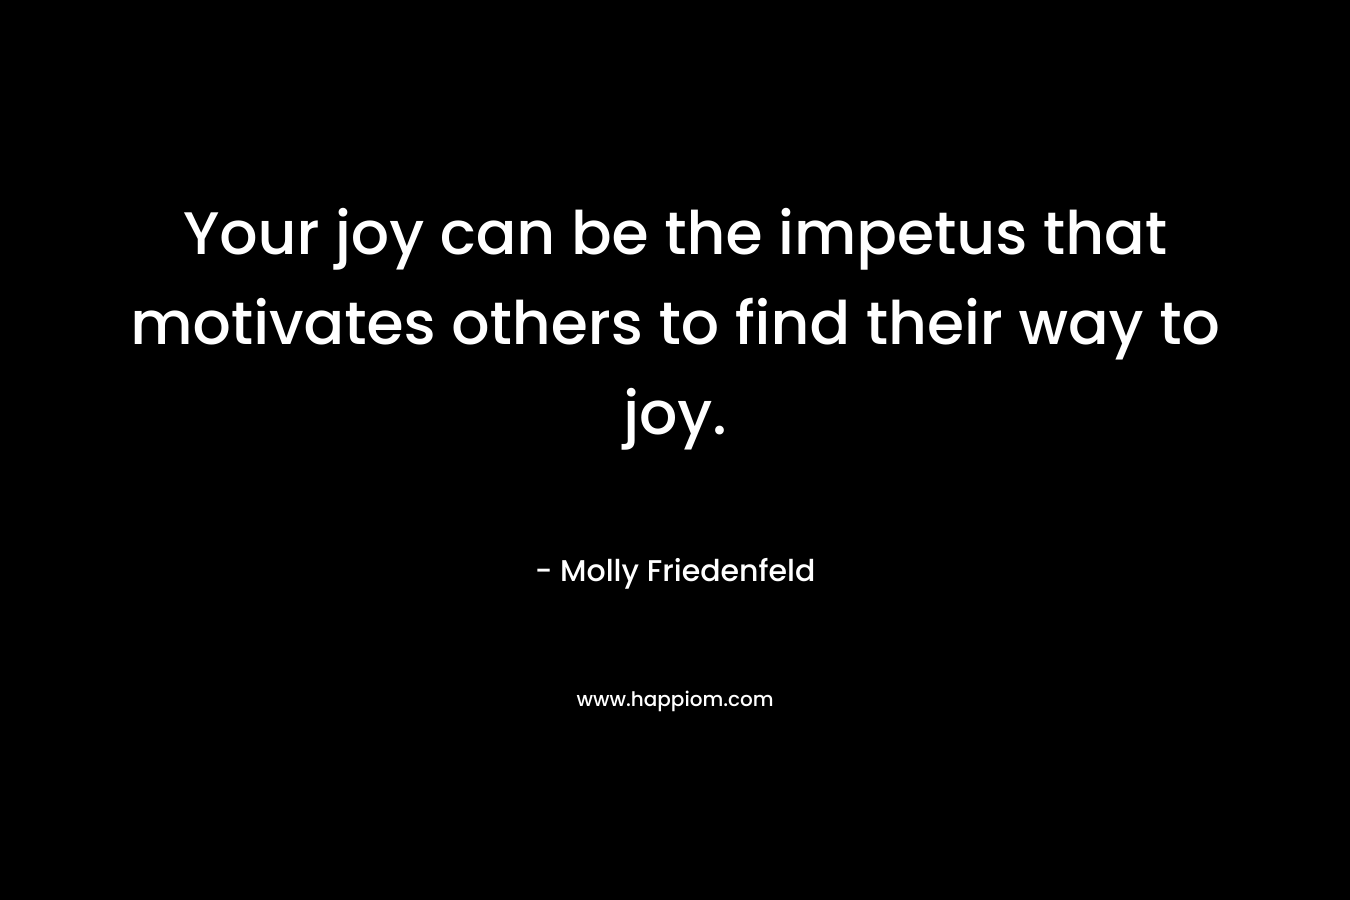 Your joy can be the impetus that motivates others to find their way to joy.